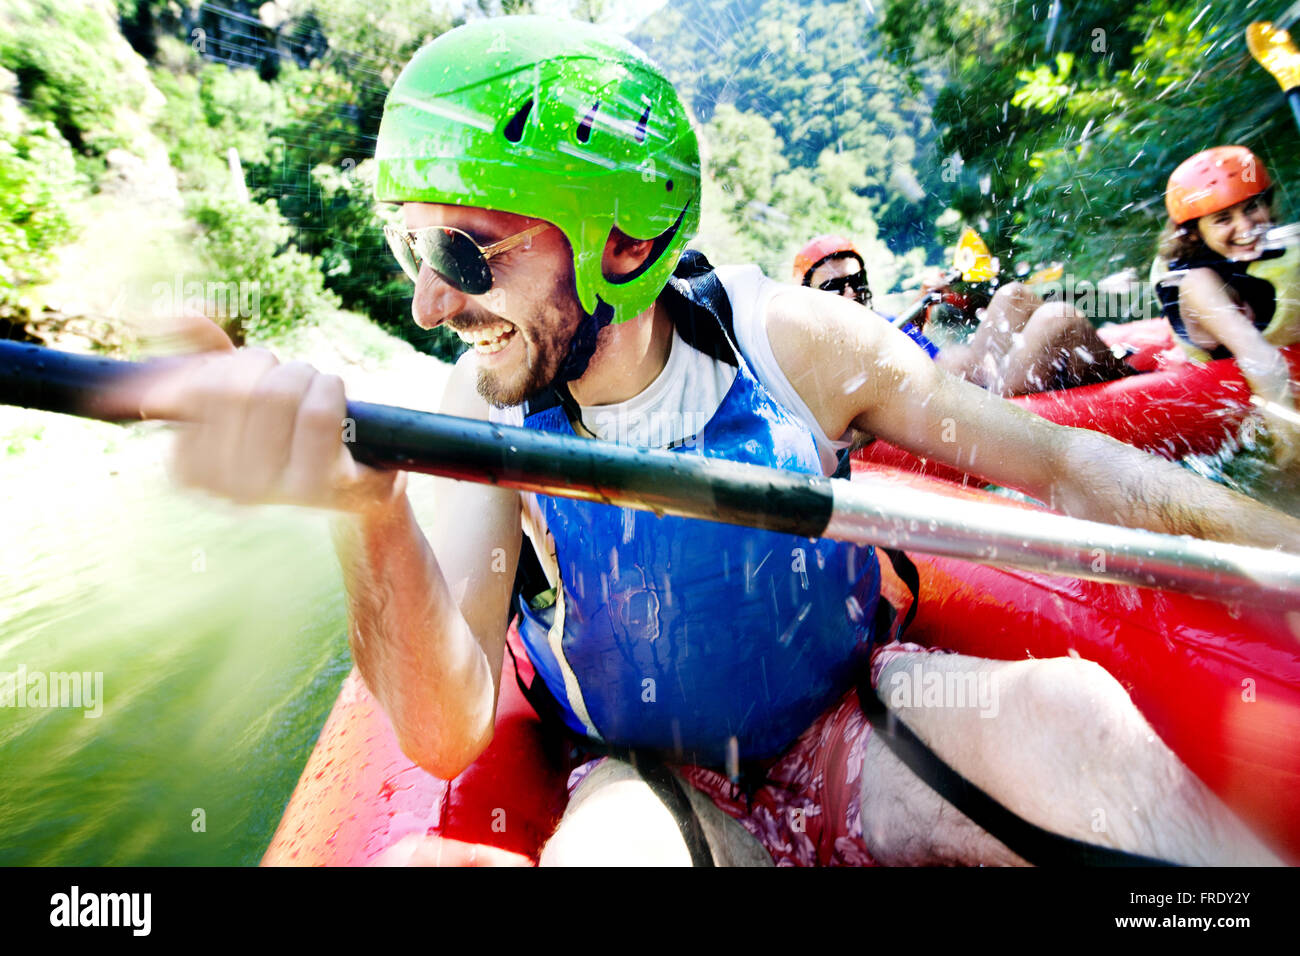 Excited male having fun, laughing on a rafting inflatable canoe being water attacked by a female from another boat. Stock Photo